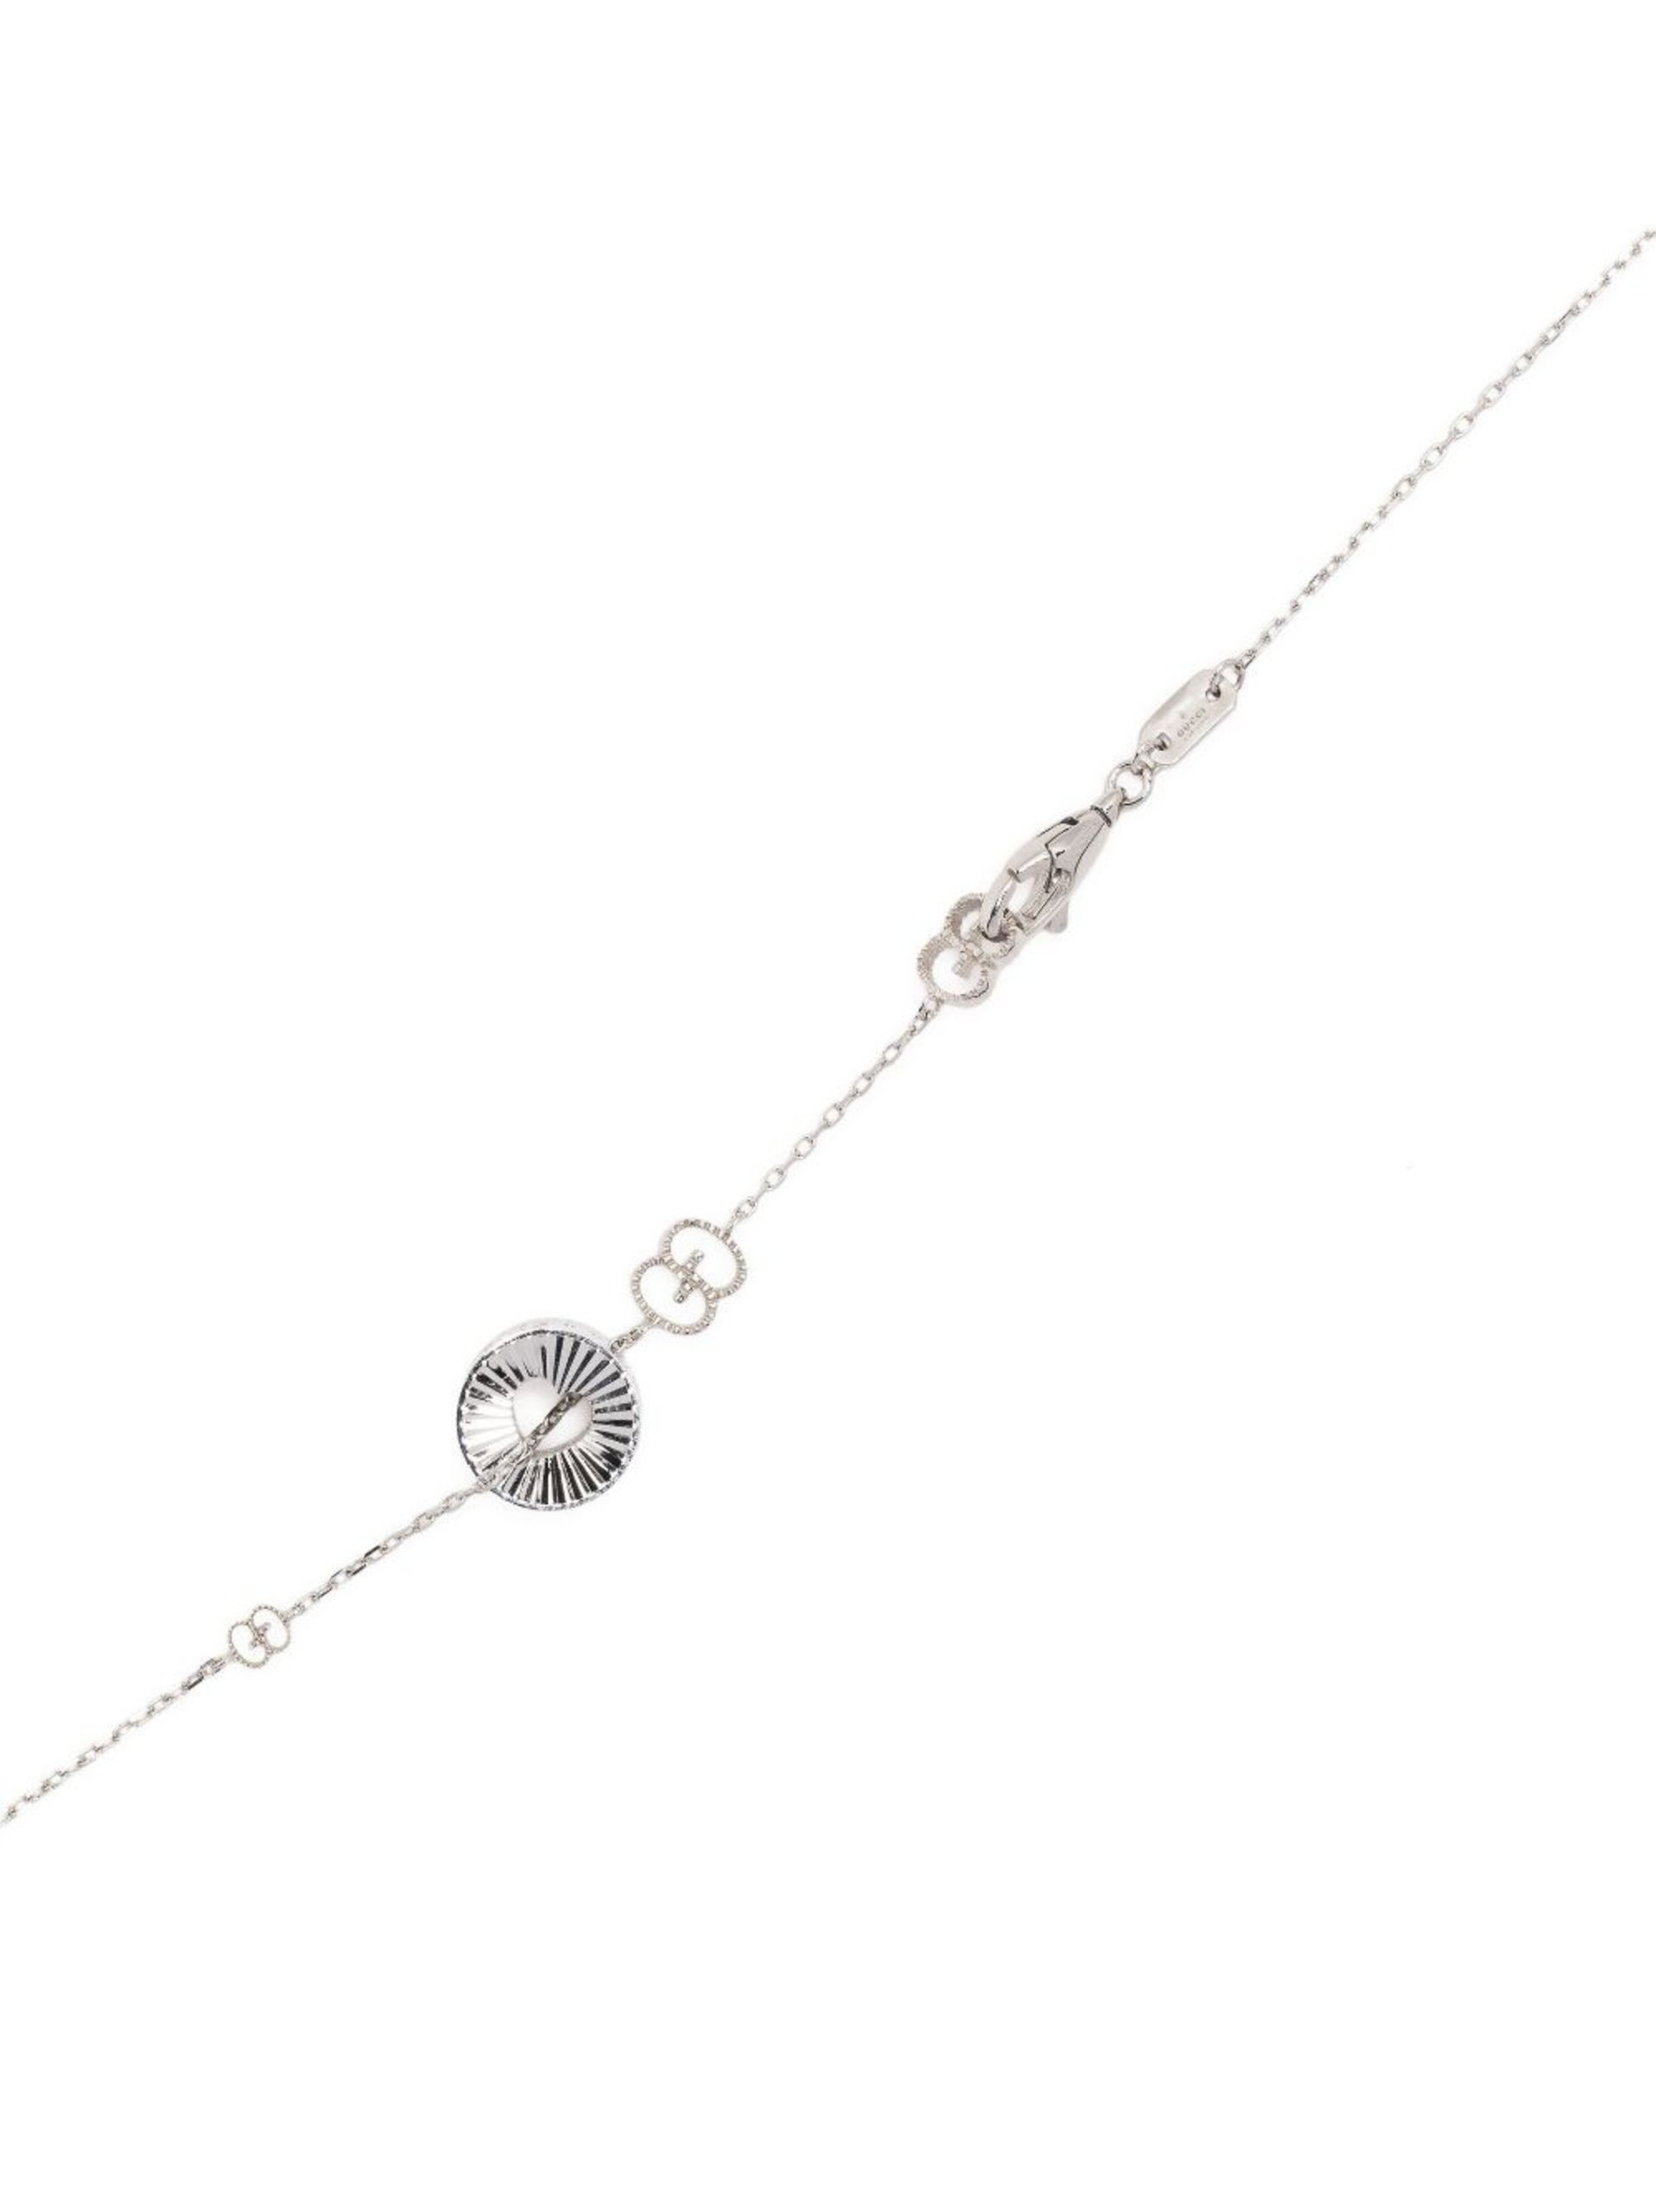 18k white gold Icon charm necklace - 4